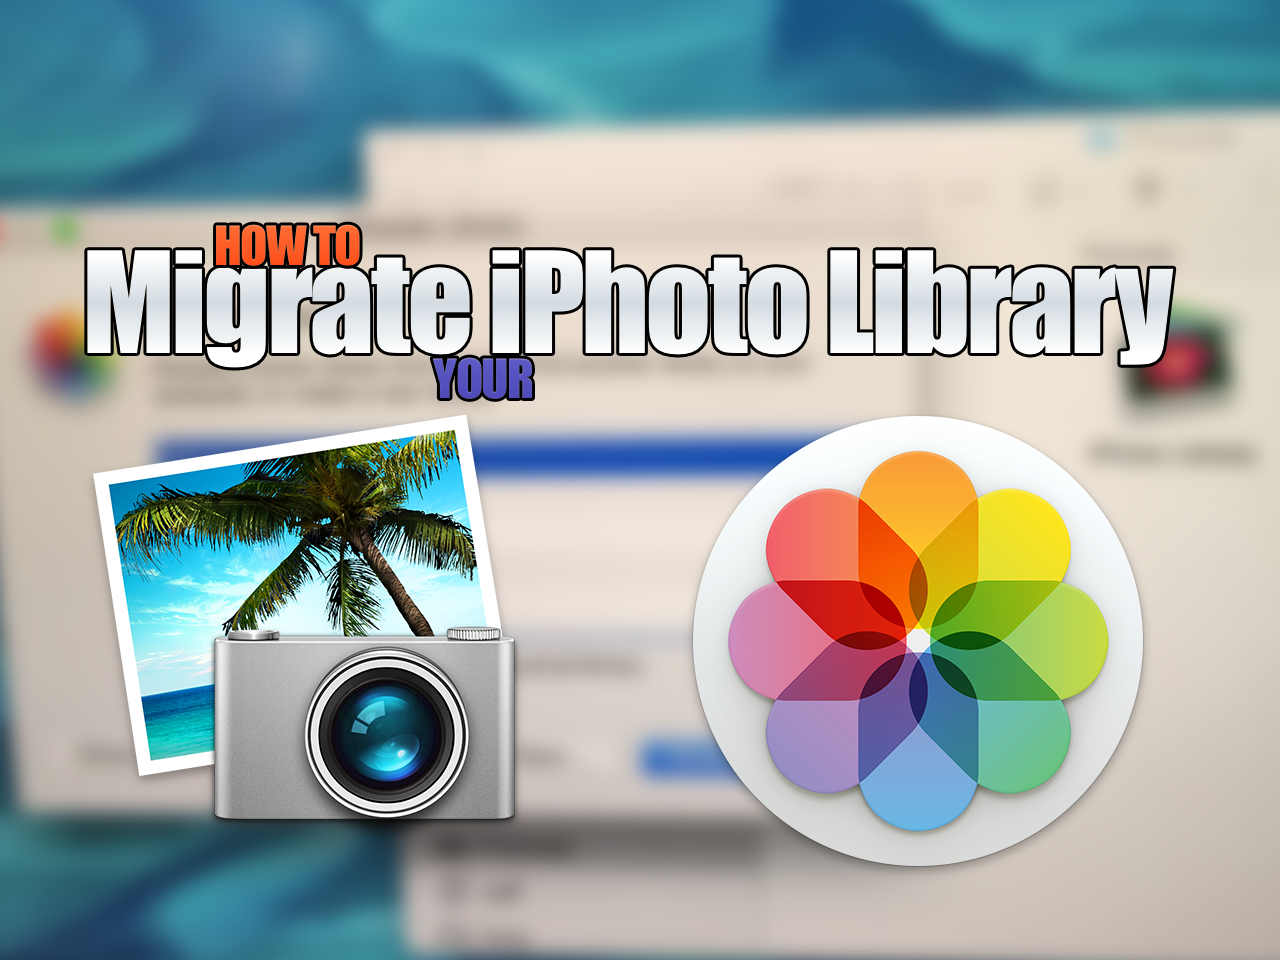 download iphoto for osx 10.9